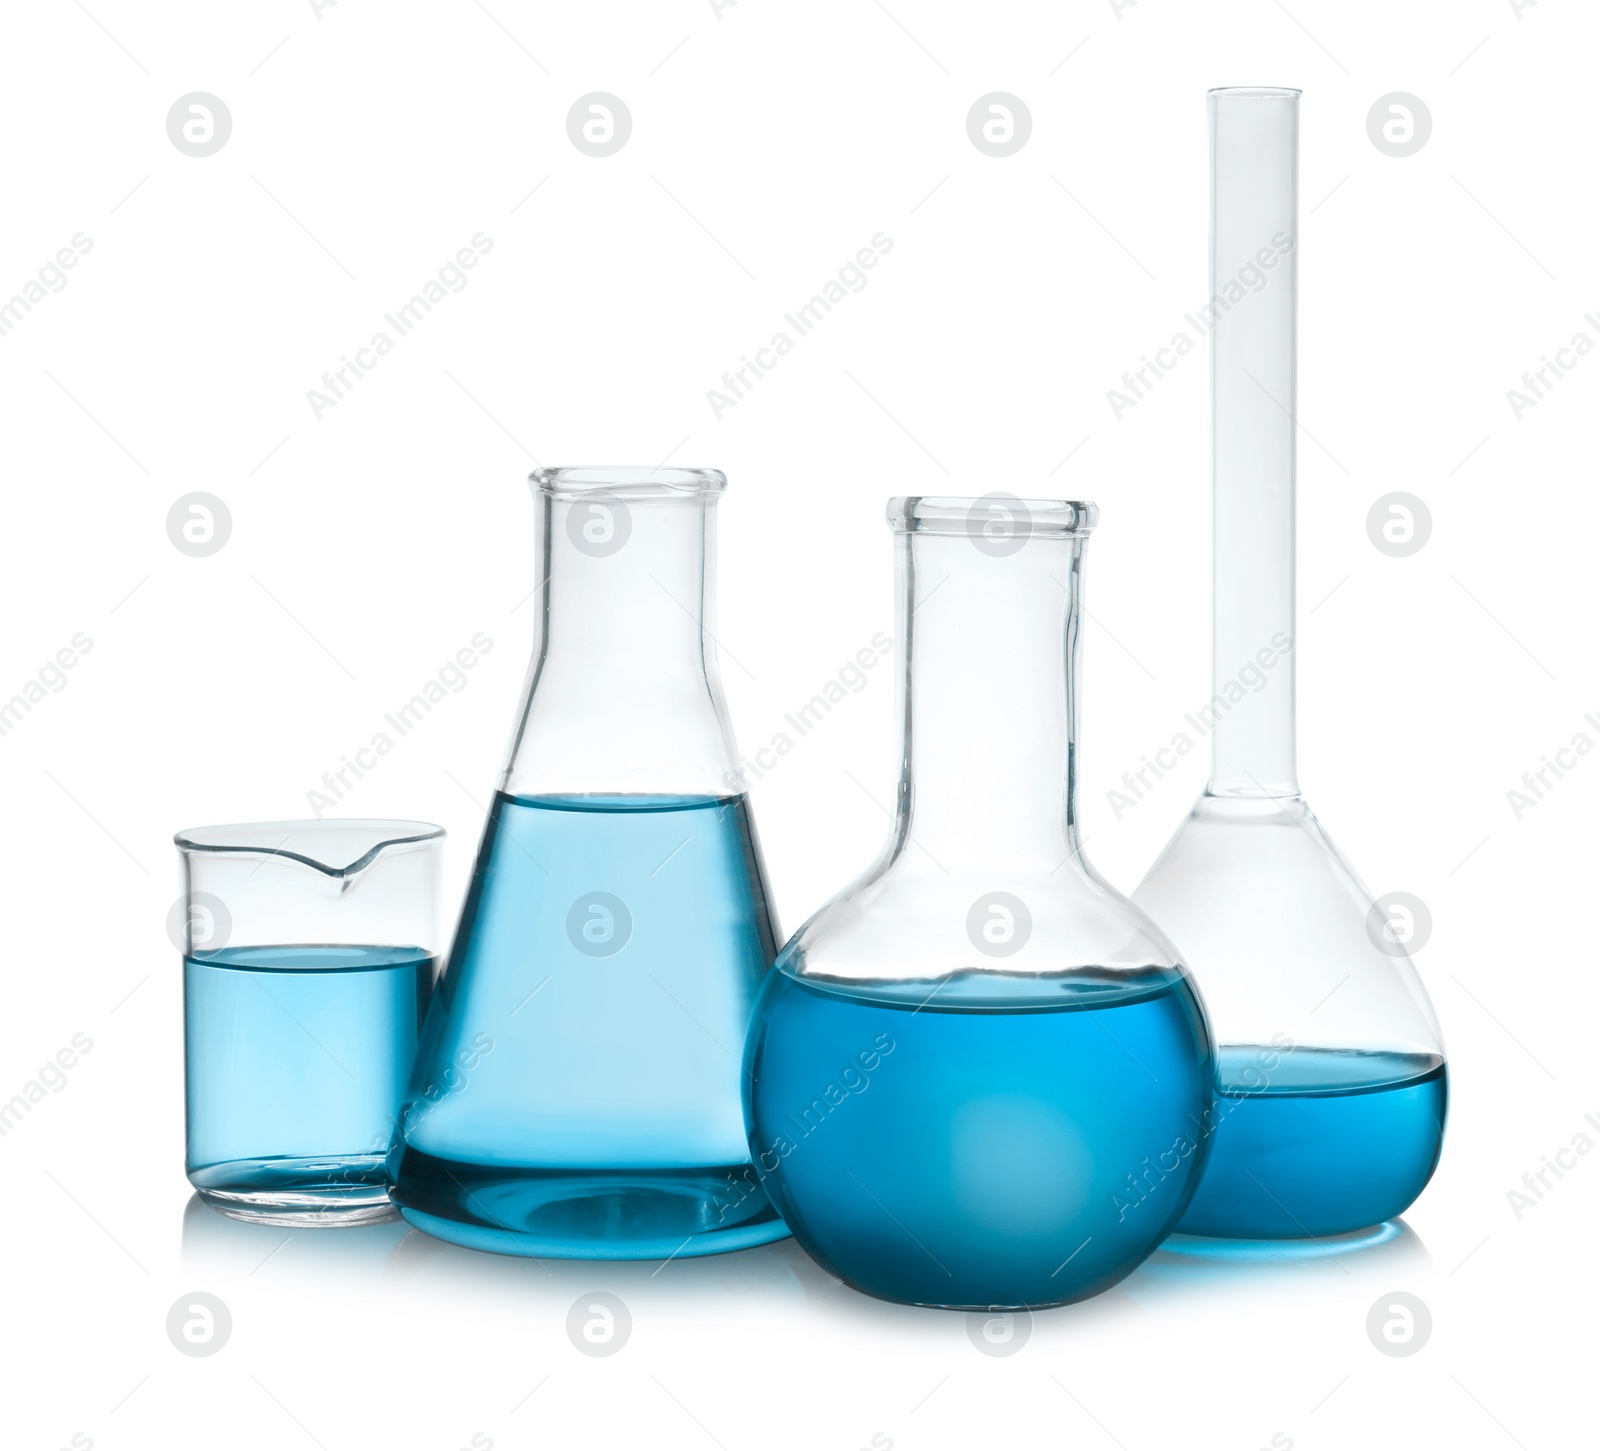 Image of Laboratory glassware with blue liquid isolated on white